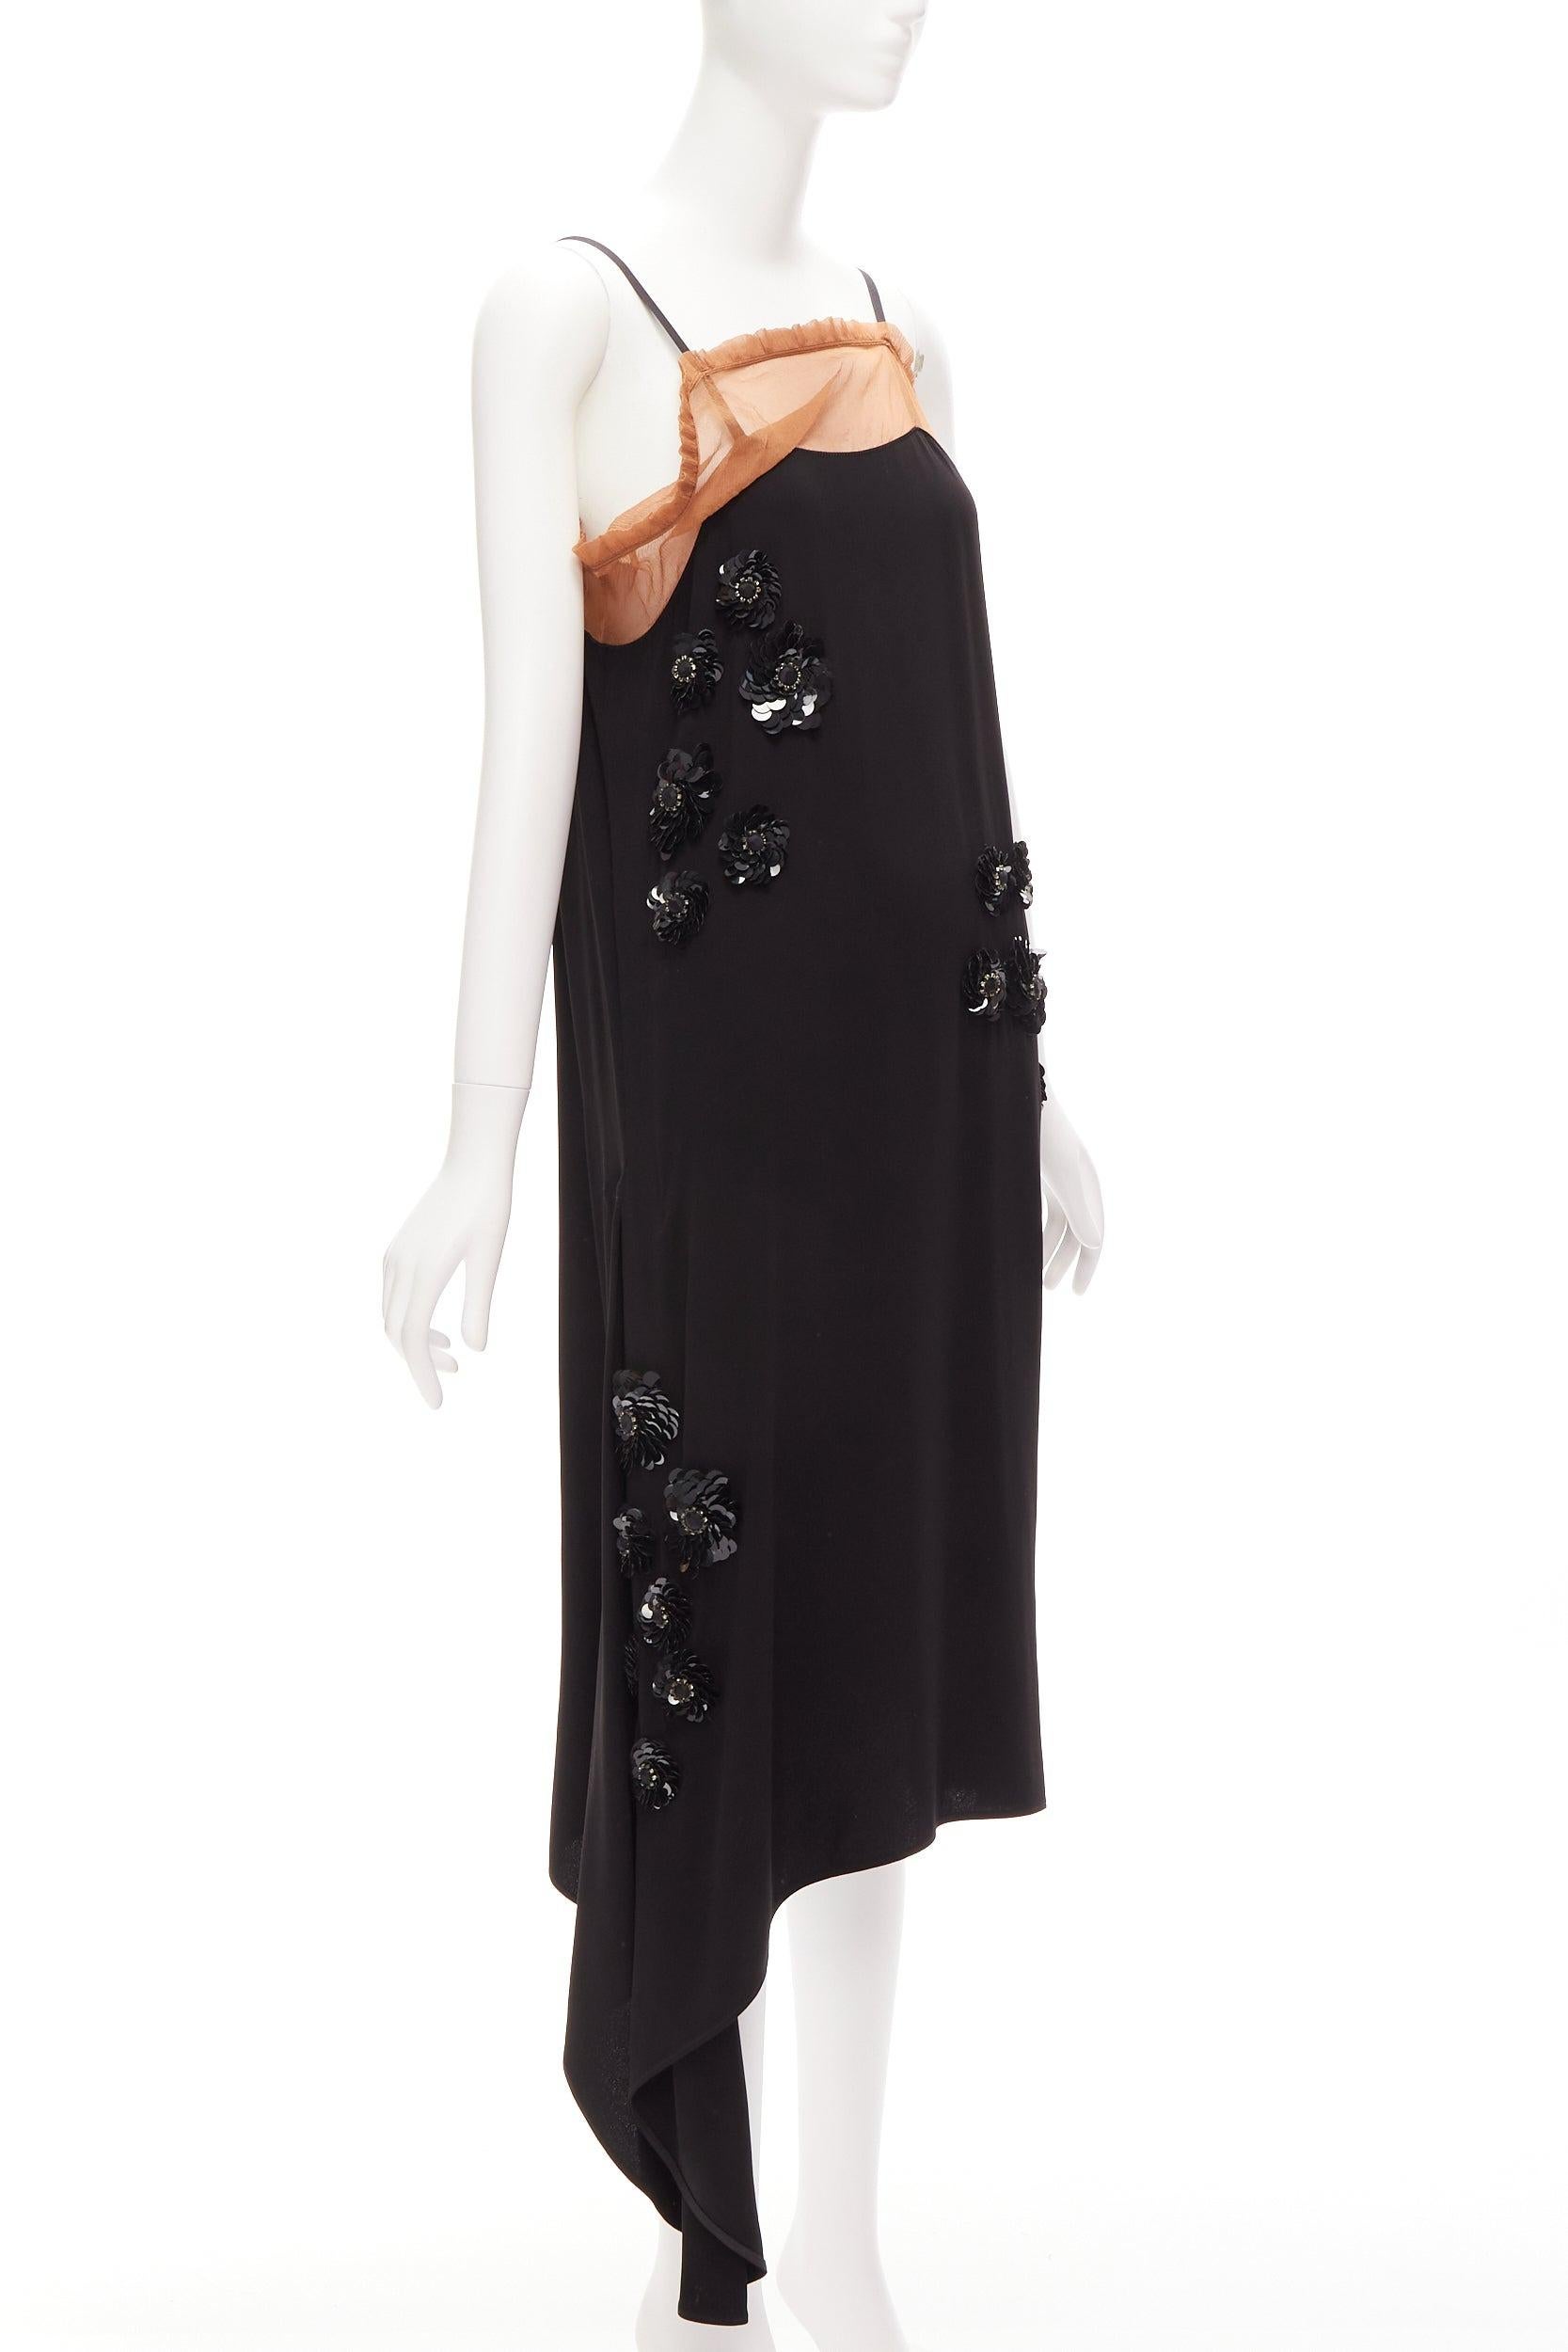 MARNI black floral sequins embellishment nude ruffle slip dress IT38 XS In Good Condition For Sale In Hong Kong, NT